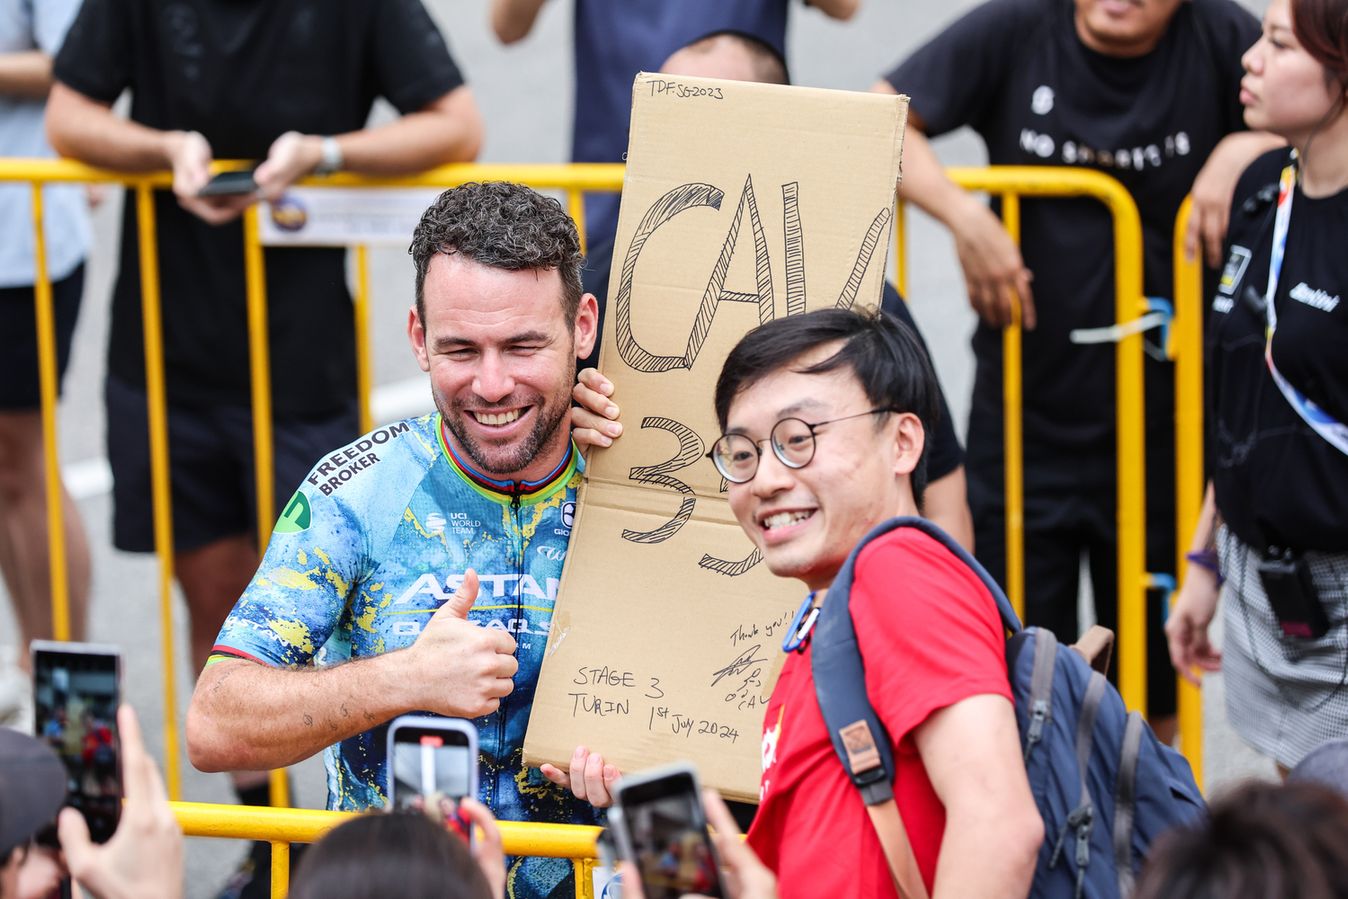 Cavendish was more than happy to meet his fans at the recent Tour de France Prudential Singapore Criterium